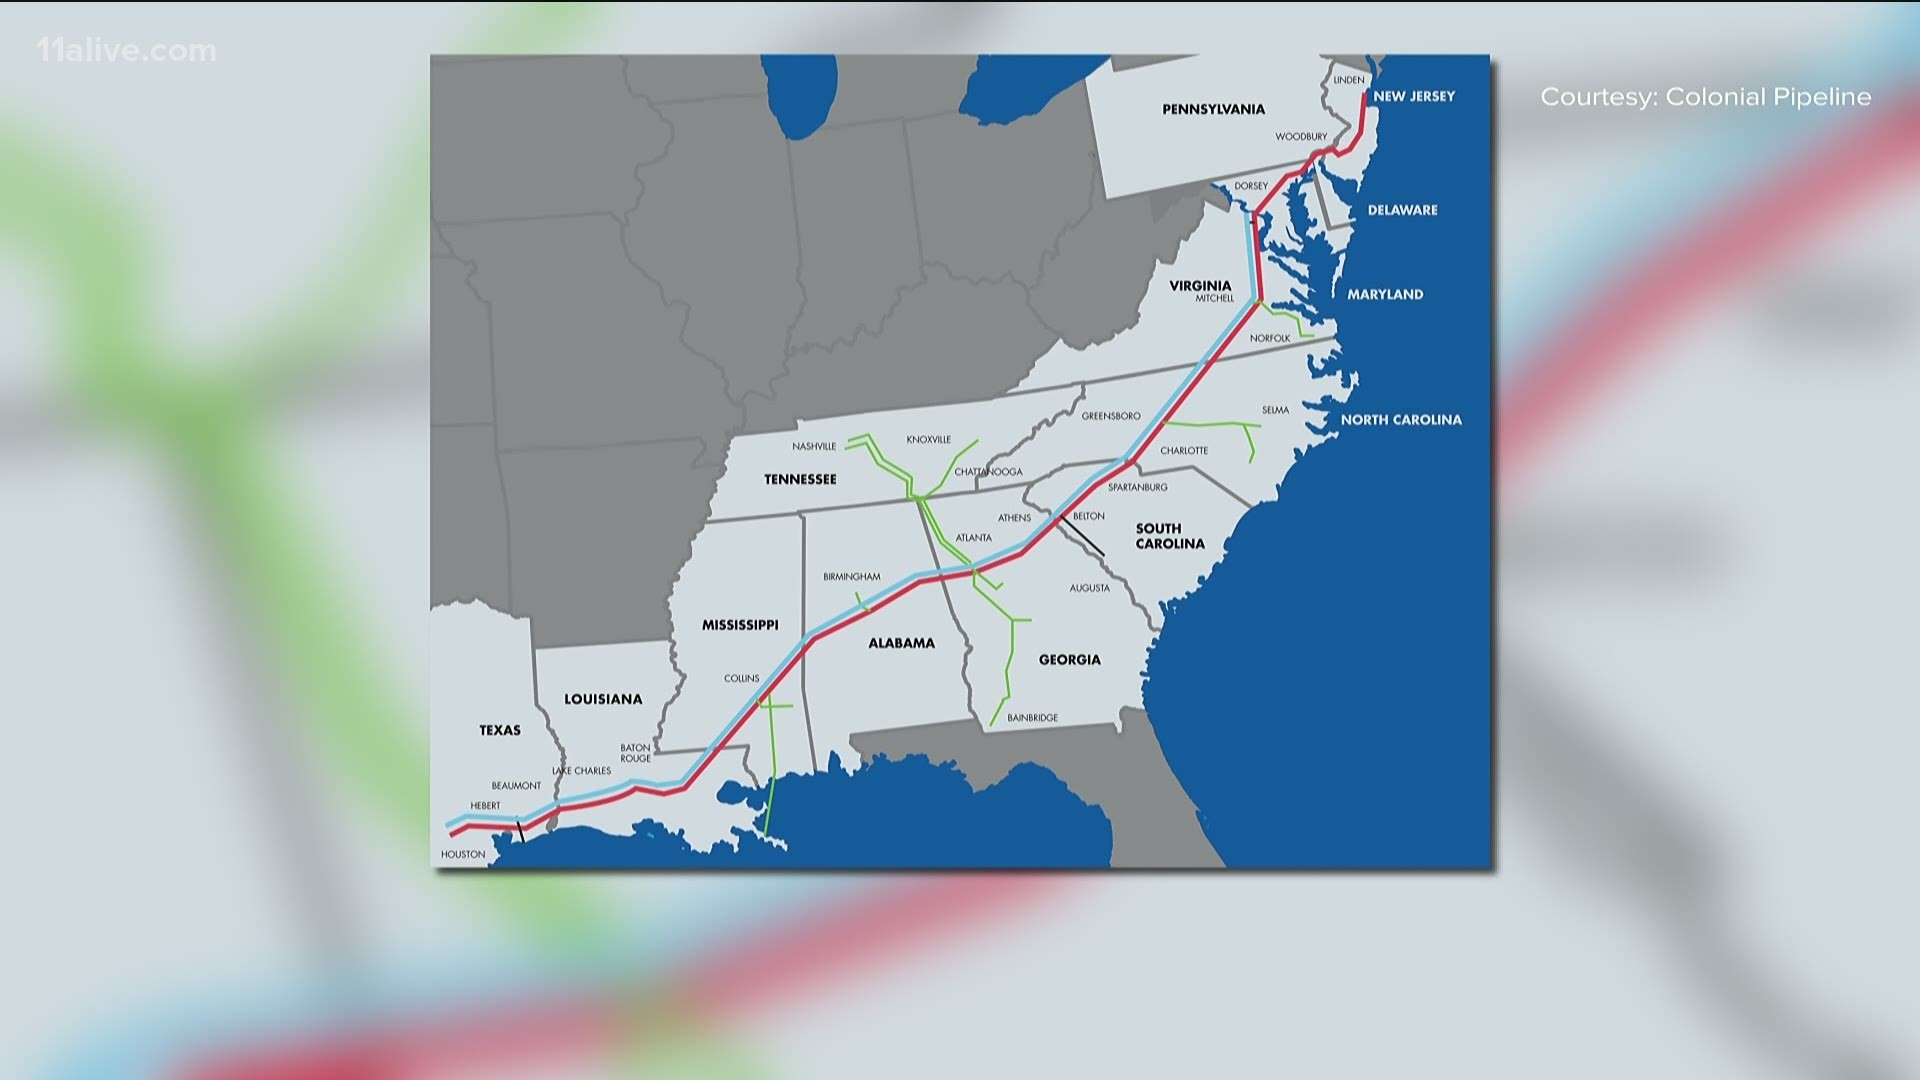 Colonial Pipeline reportedly had to shut down 5,500 miles of pipeline that run from Texas to New York due to the attack.